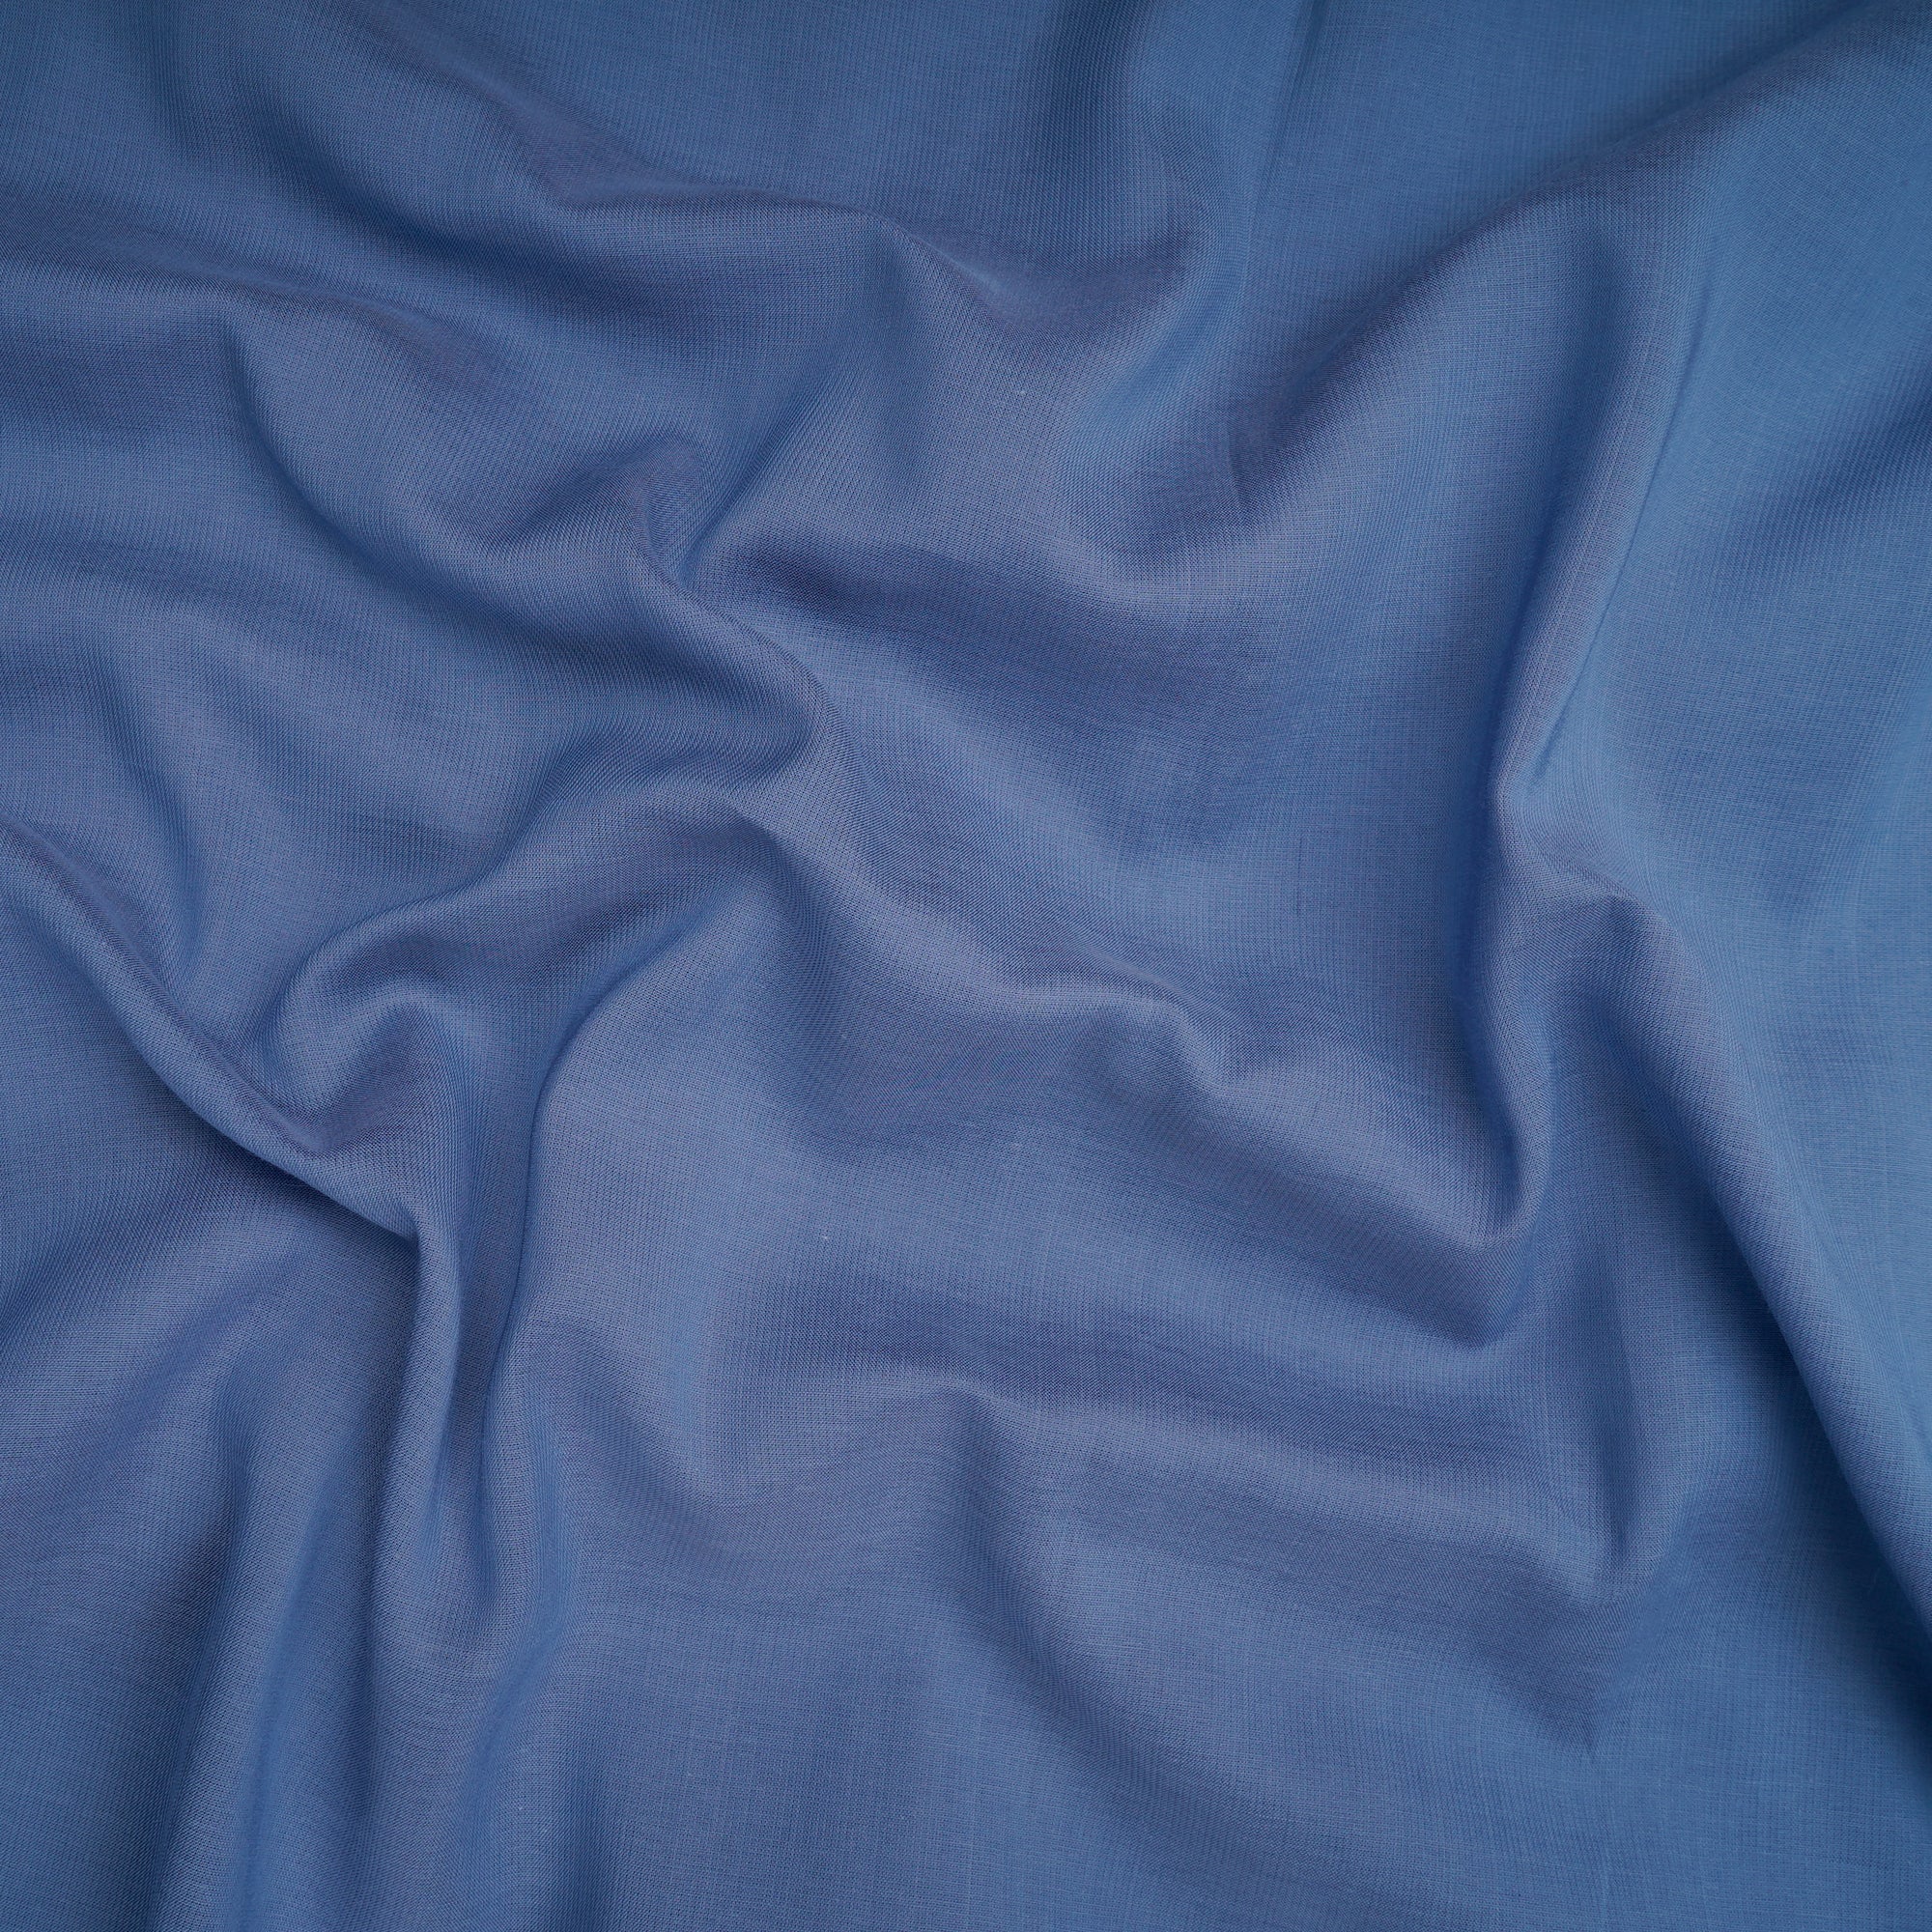 Bel Air Blue Viscose Terry Voile Fabric